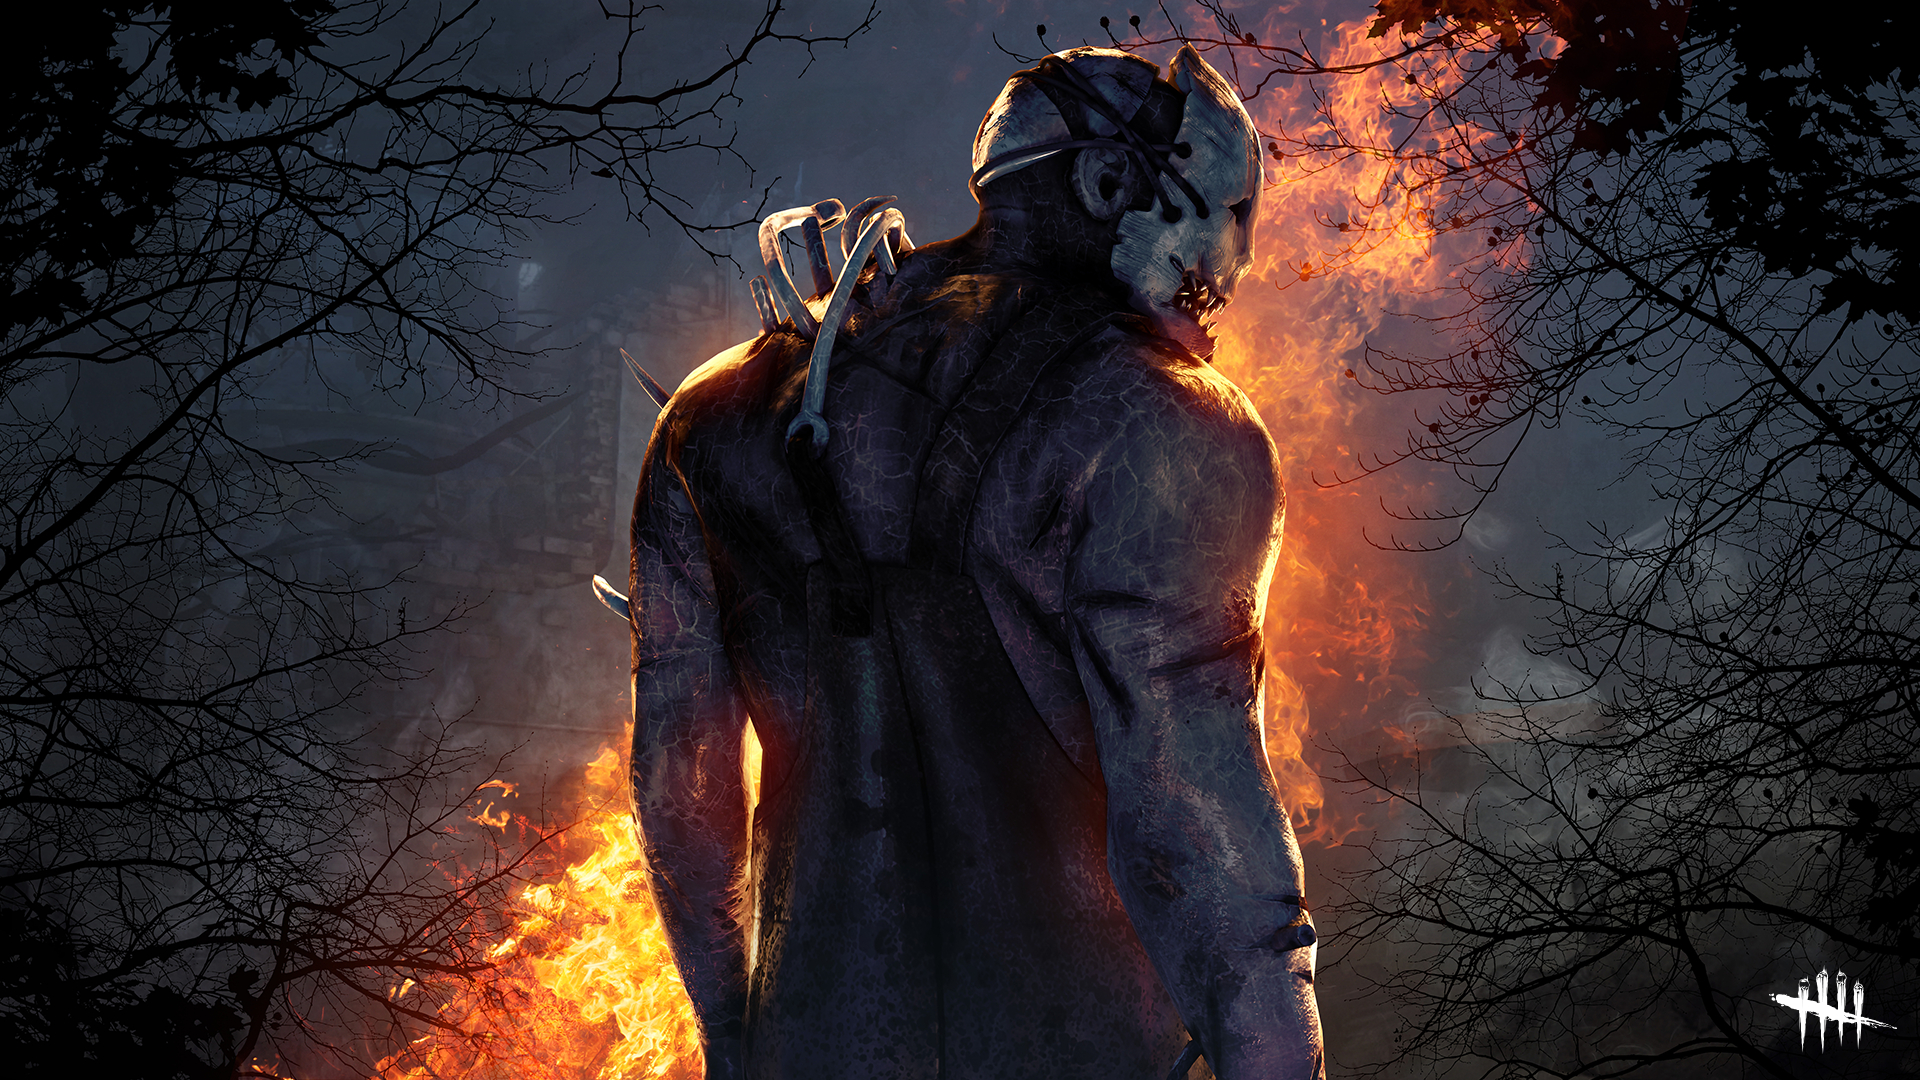 The Wraith Dead By Daylight Wallpapers